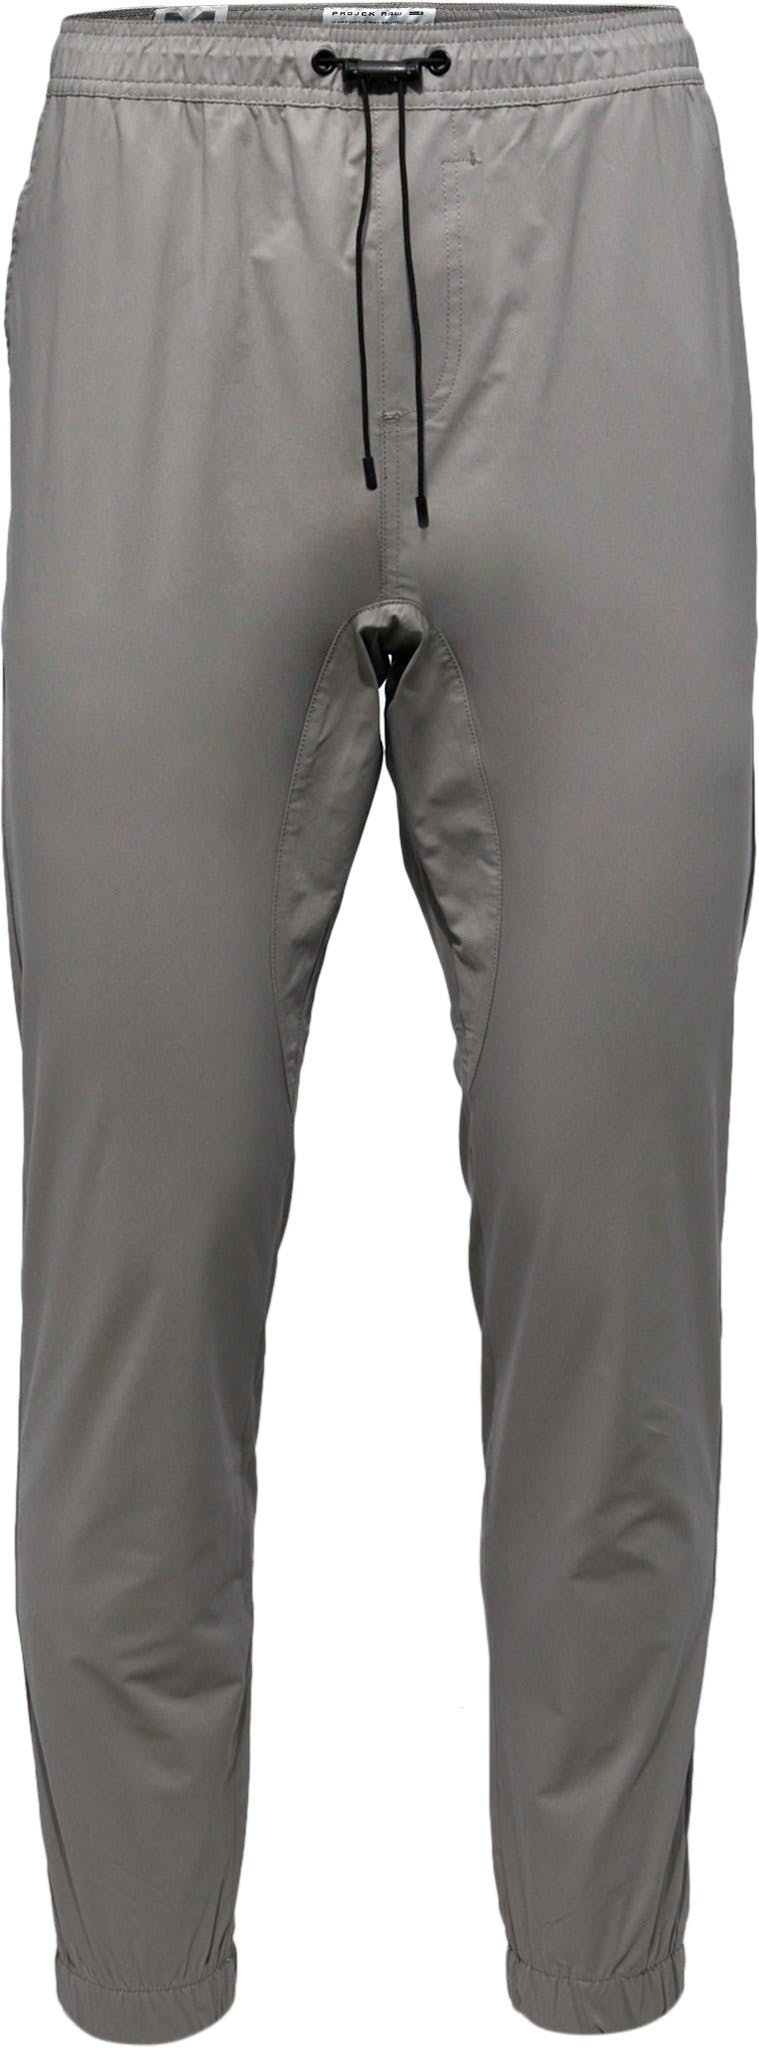 Product image for Lightweight Tech Jogger - Men's